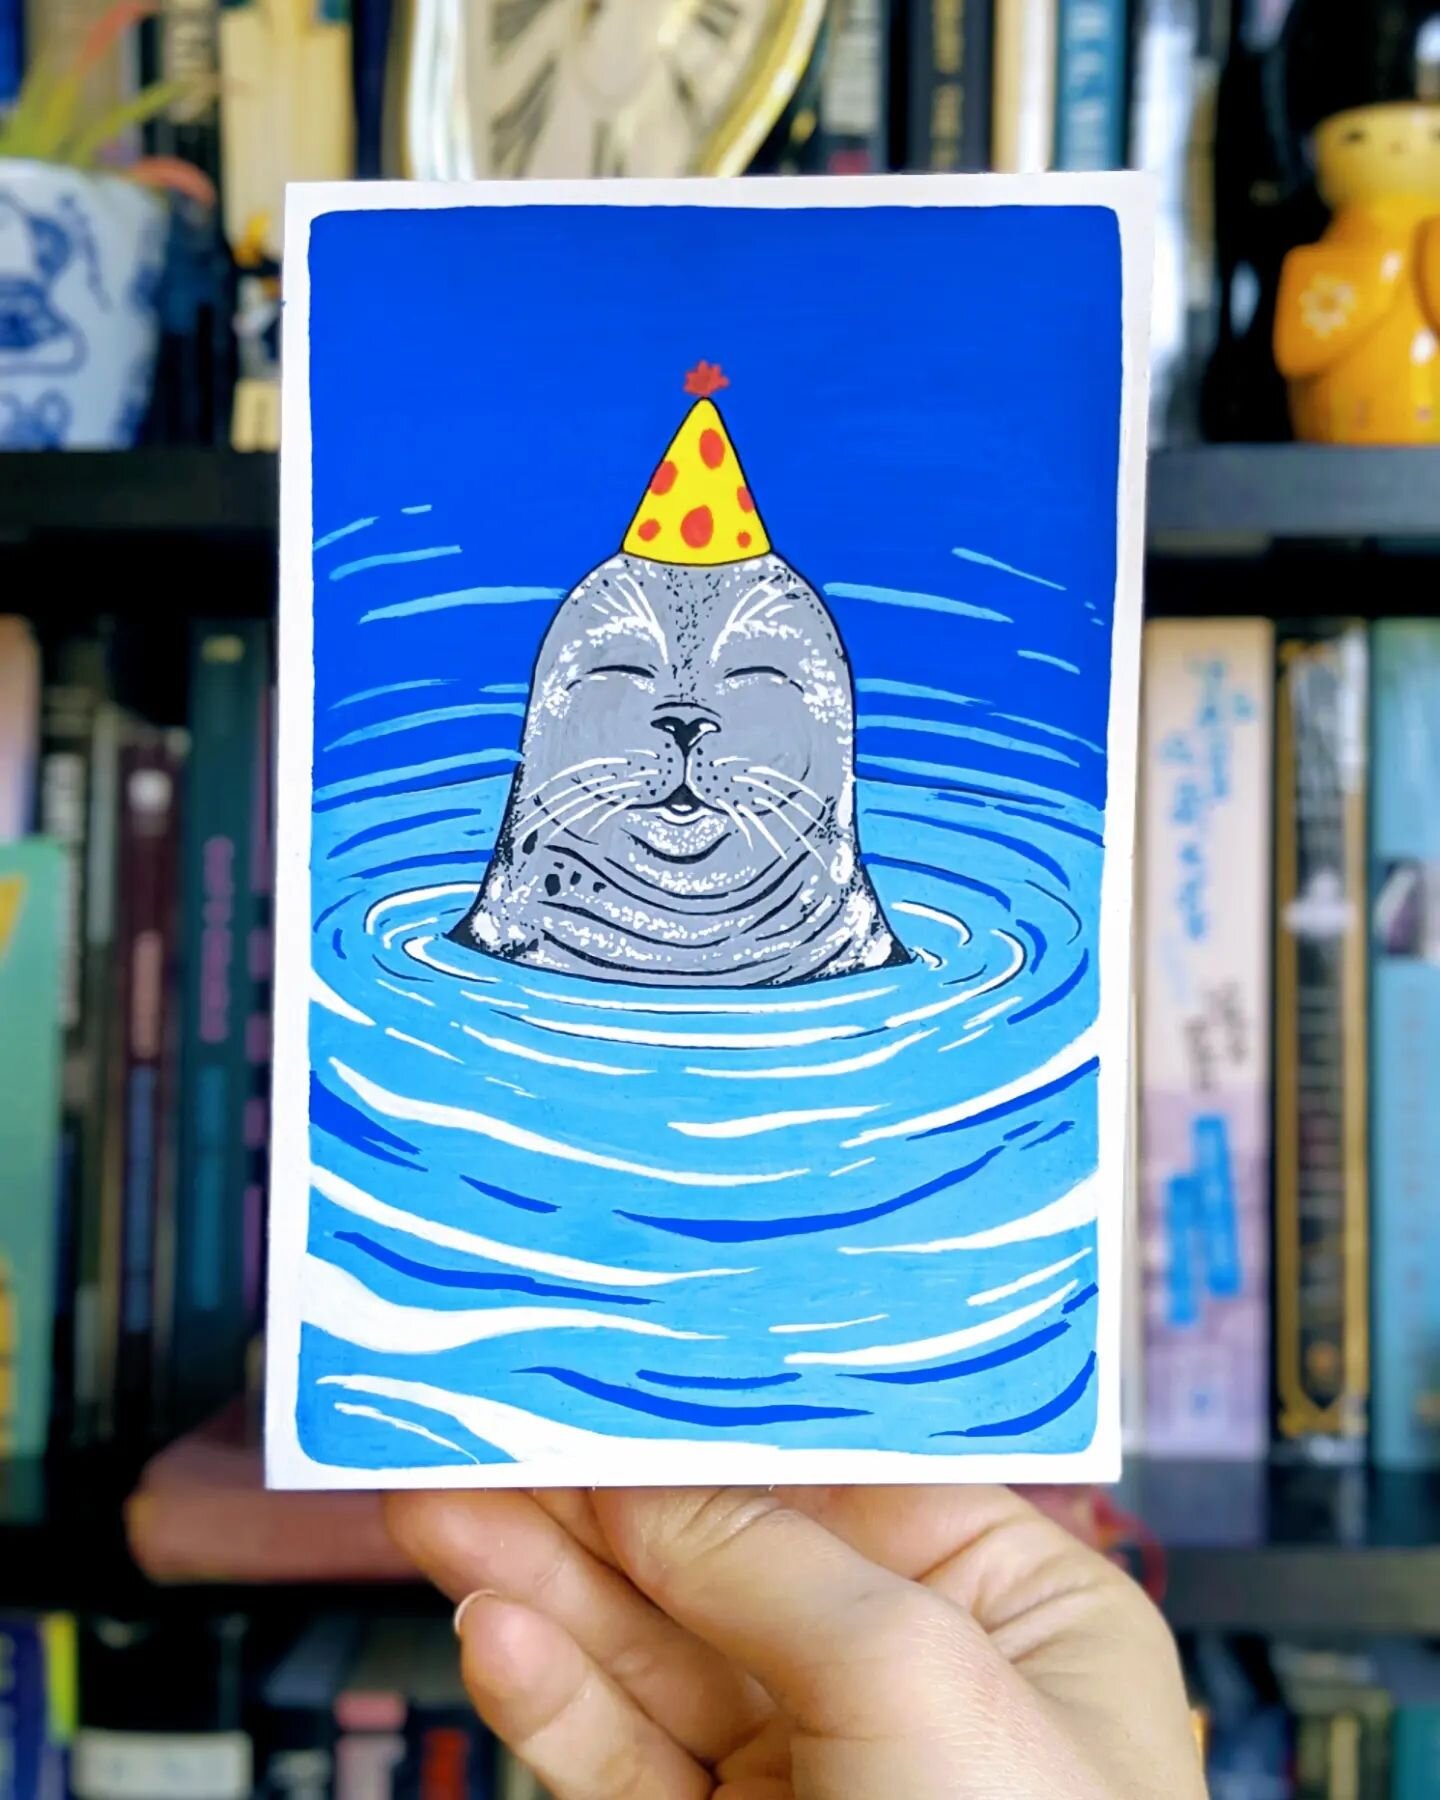 My partner's birthday is an excuse to draw animals in party hats. @indestructible_object
.
.
.
.
#birthday #greetingcards #animals #watercolor #posca #poscaart #handmade #artistsoninstagram #birthdaycard